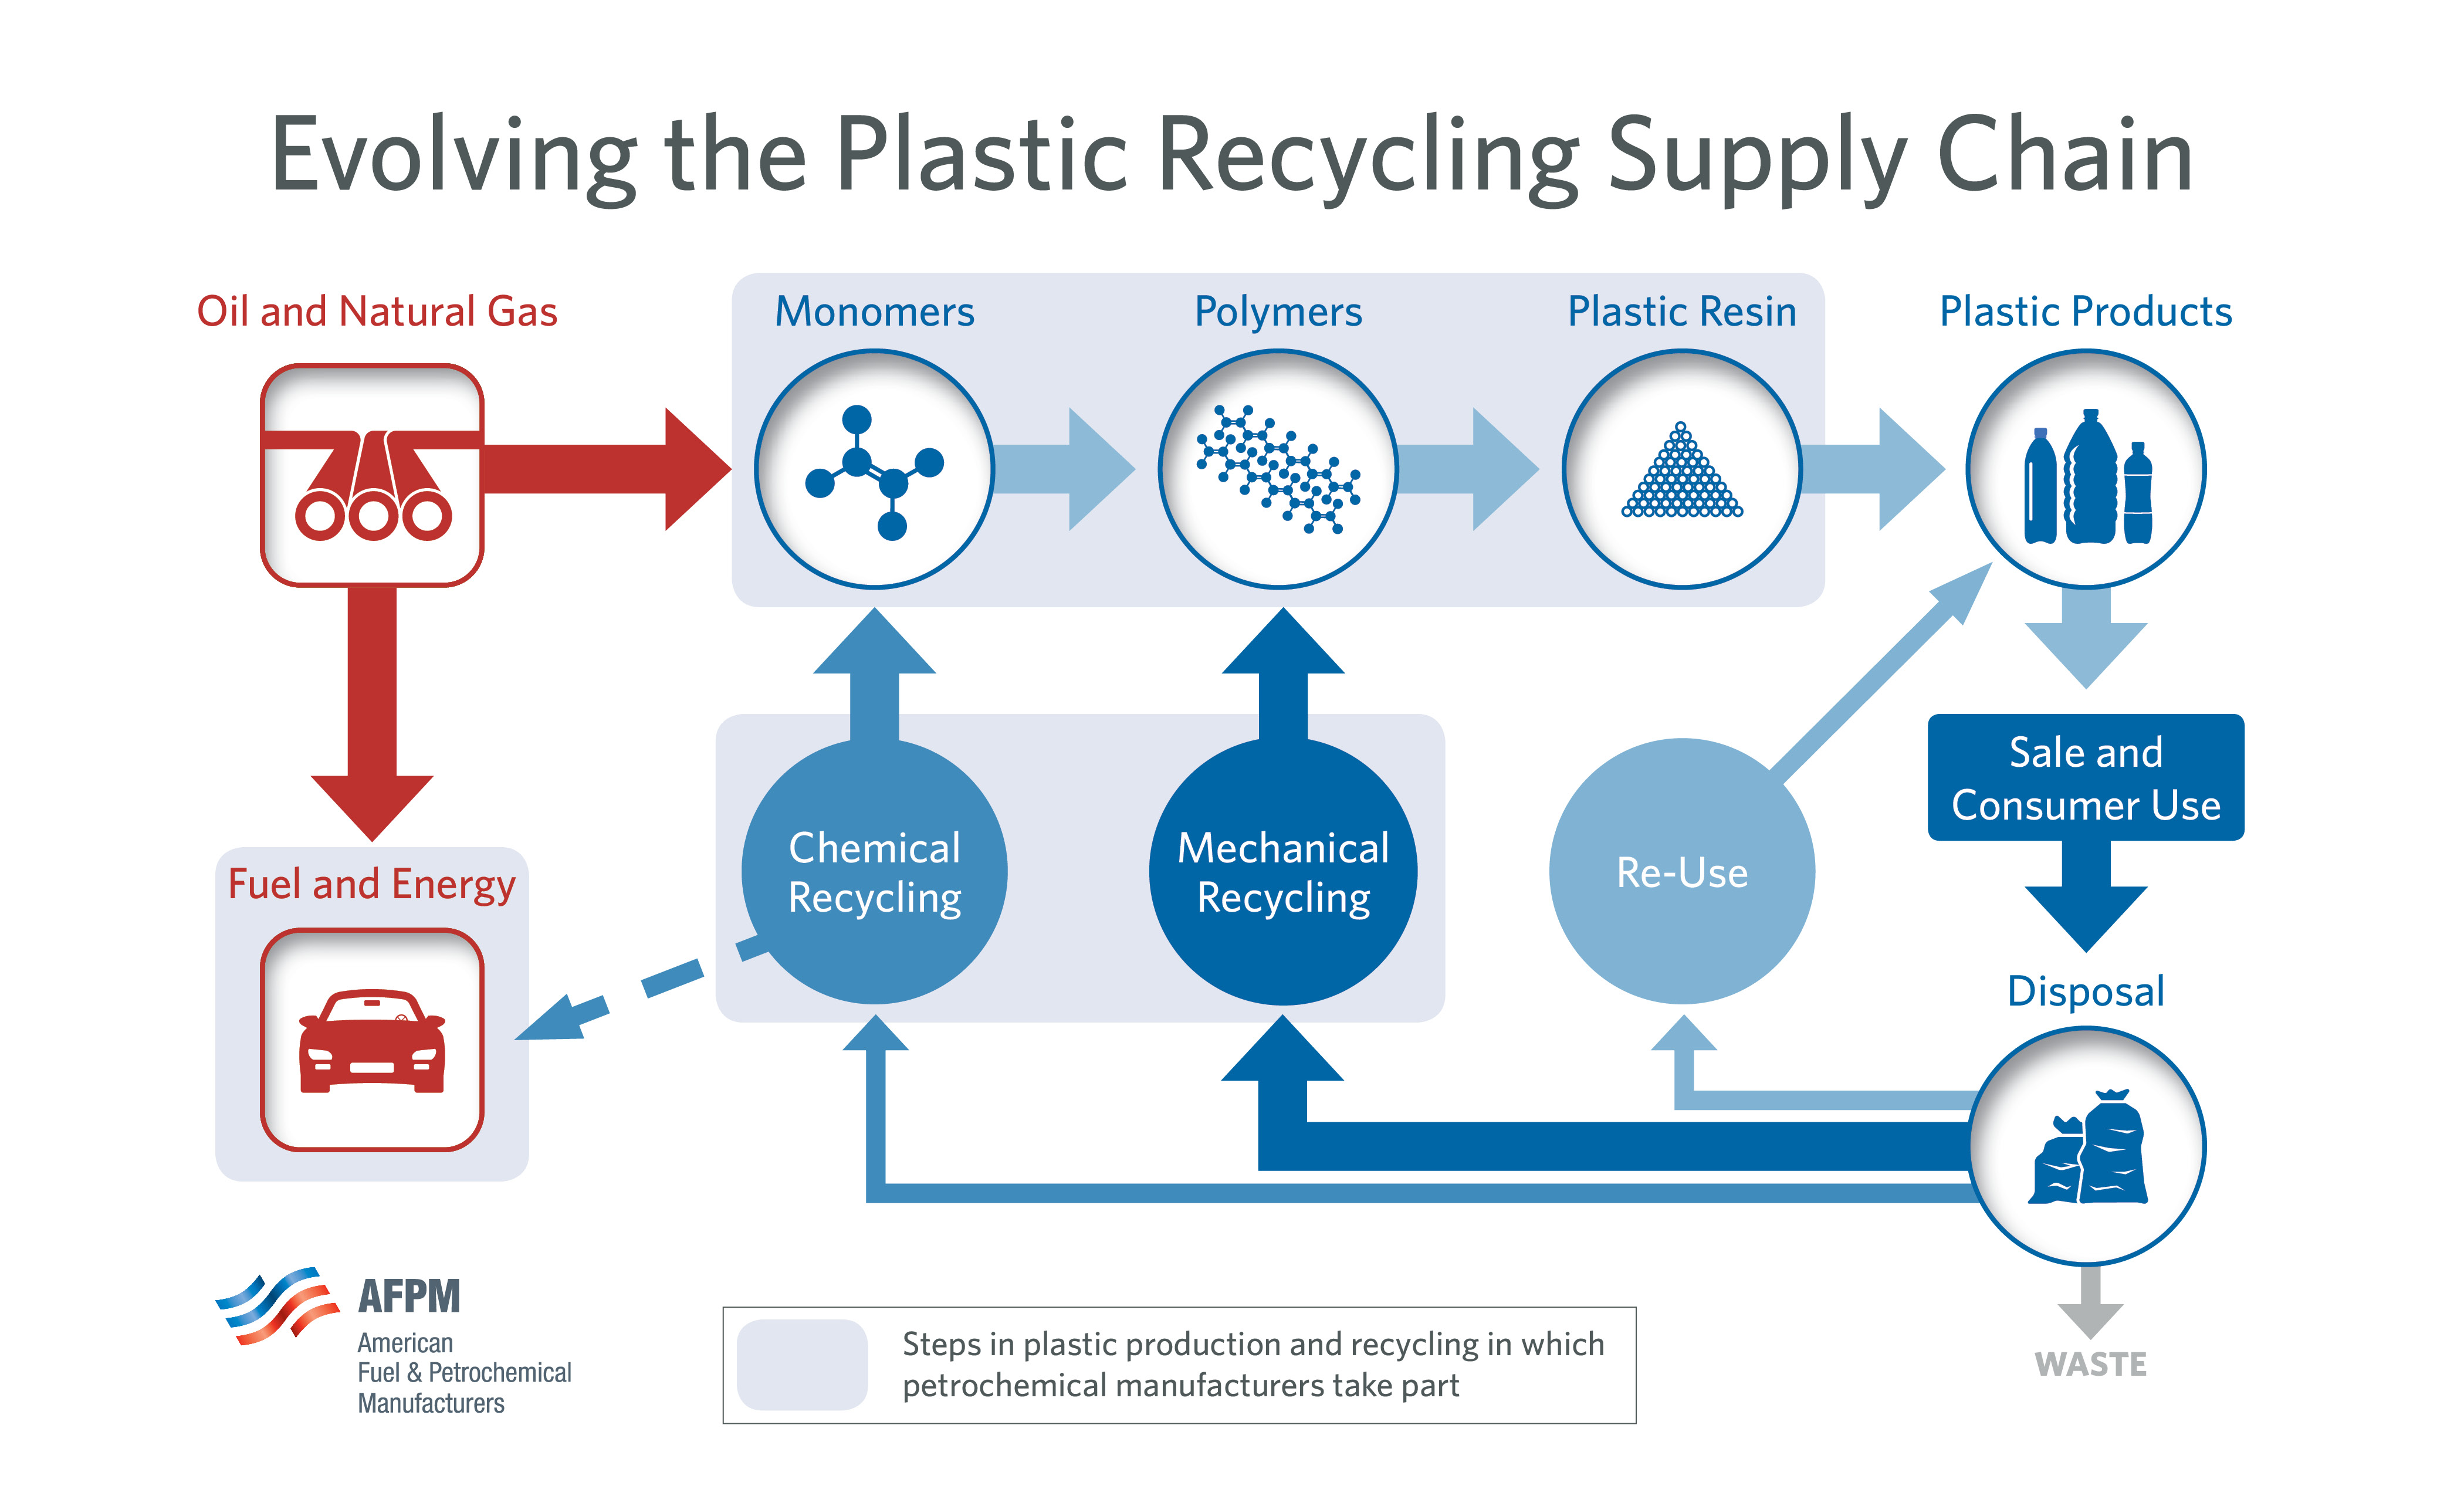 Petrochemical manufacturers — who transform oil and natural gas into monomers, polymers and
                                plastic resins — are pioneering in chemical recycling and breaking new ground in mechanical
                                recycling, turning what would otherwise be plastic waste into valuable resources.